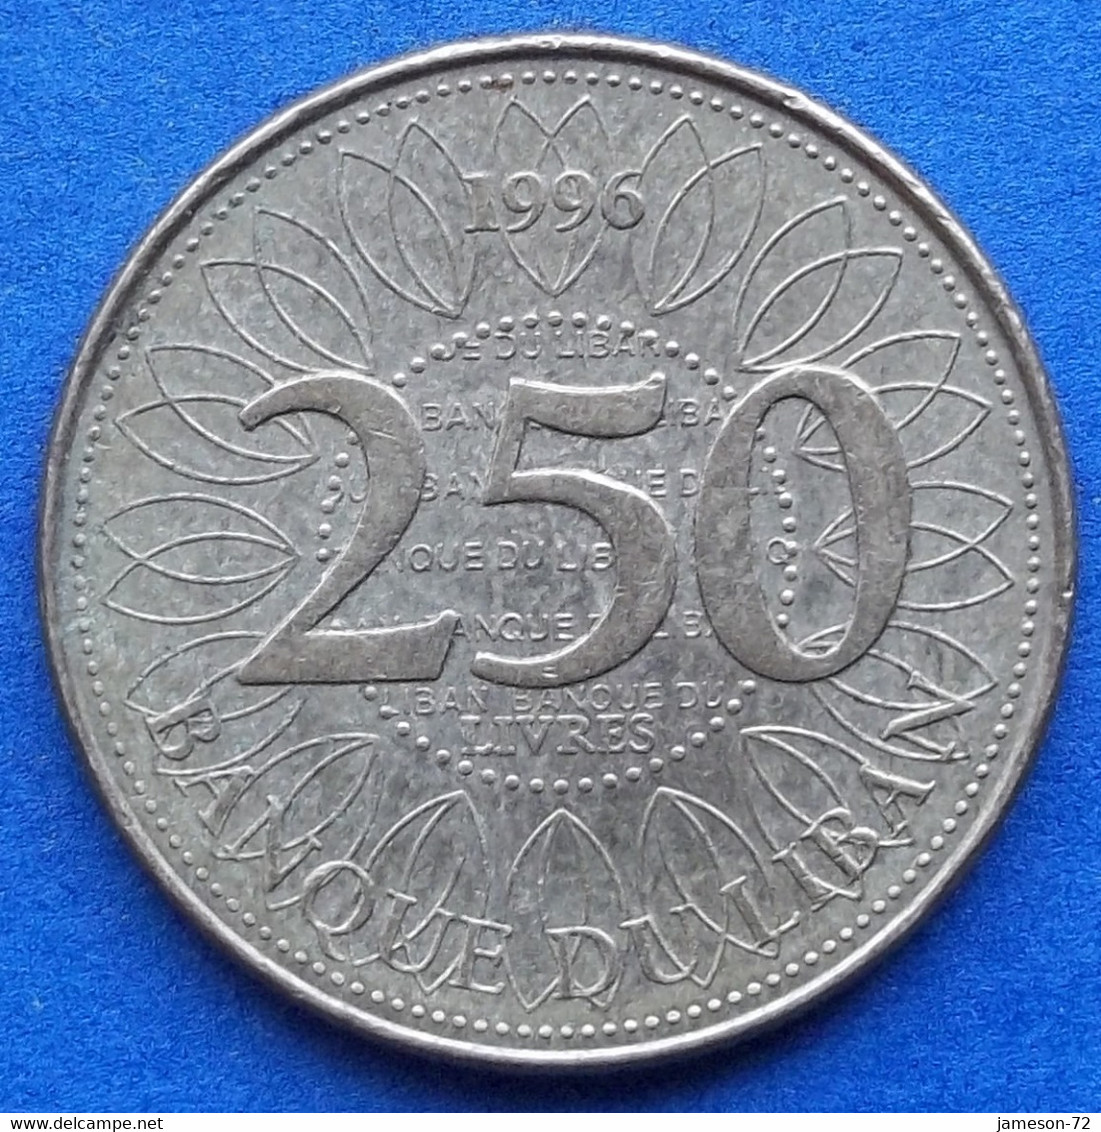 LEBANON - 250 Livres 1996 KM# 36 Independent Republic - Edelweiss Coins - Libanon